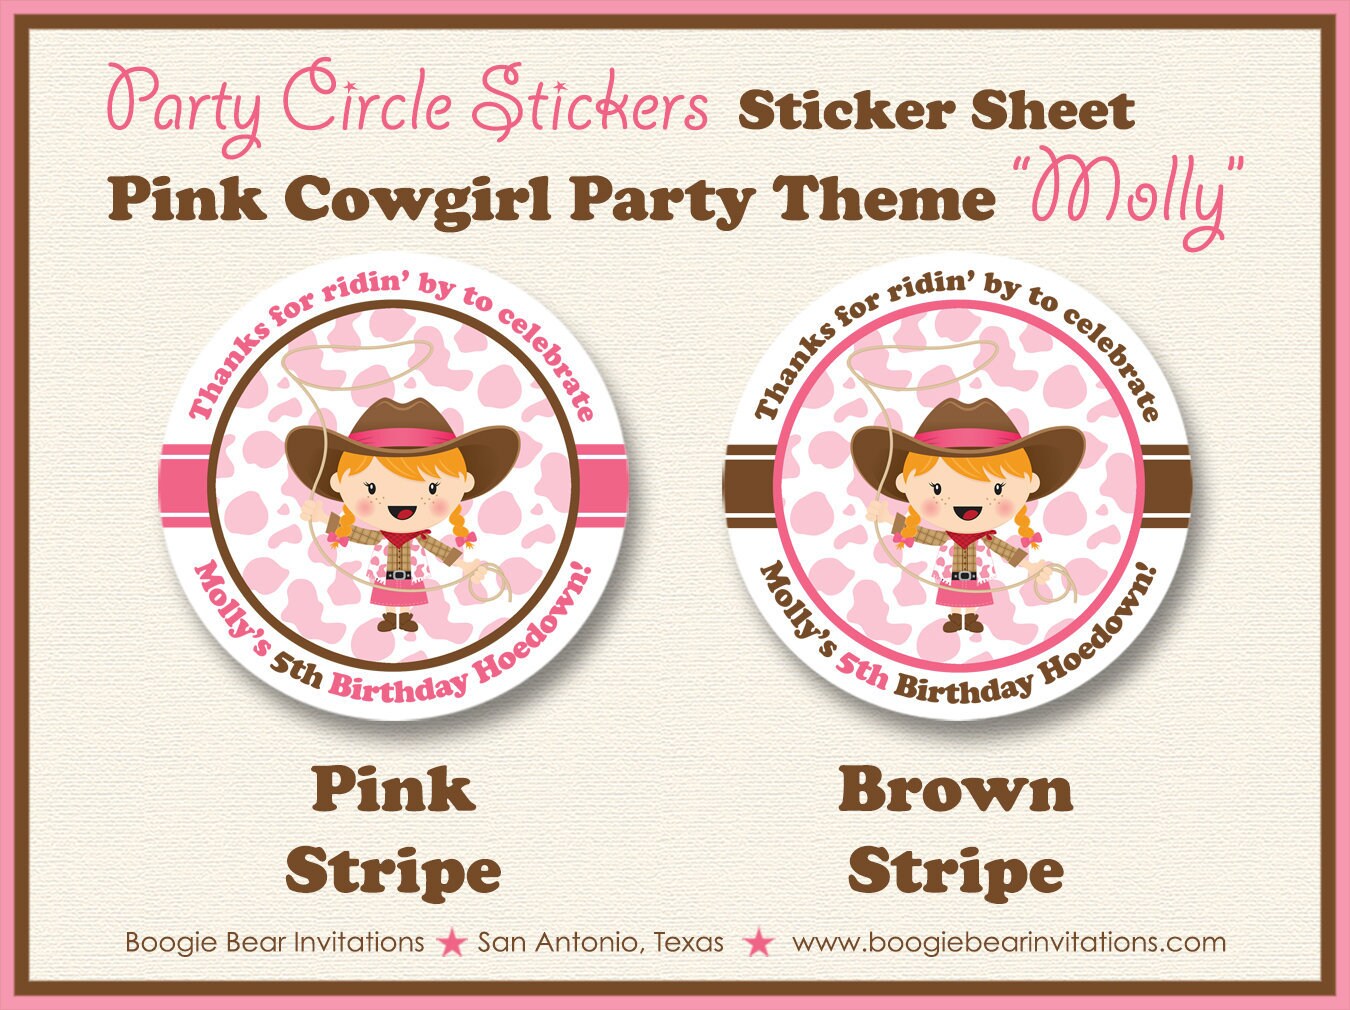 Pink Cowgirl Birthday Party Stickers Circle Sheet Round Circle Girl Up Brown Hat Cow Print Country Farm Boogie Bear Invitations Molly Theme